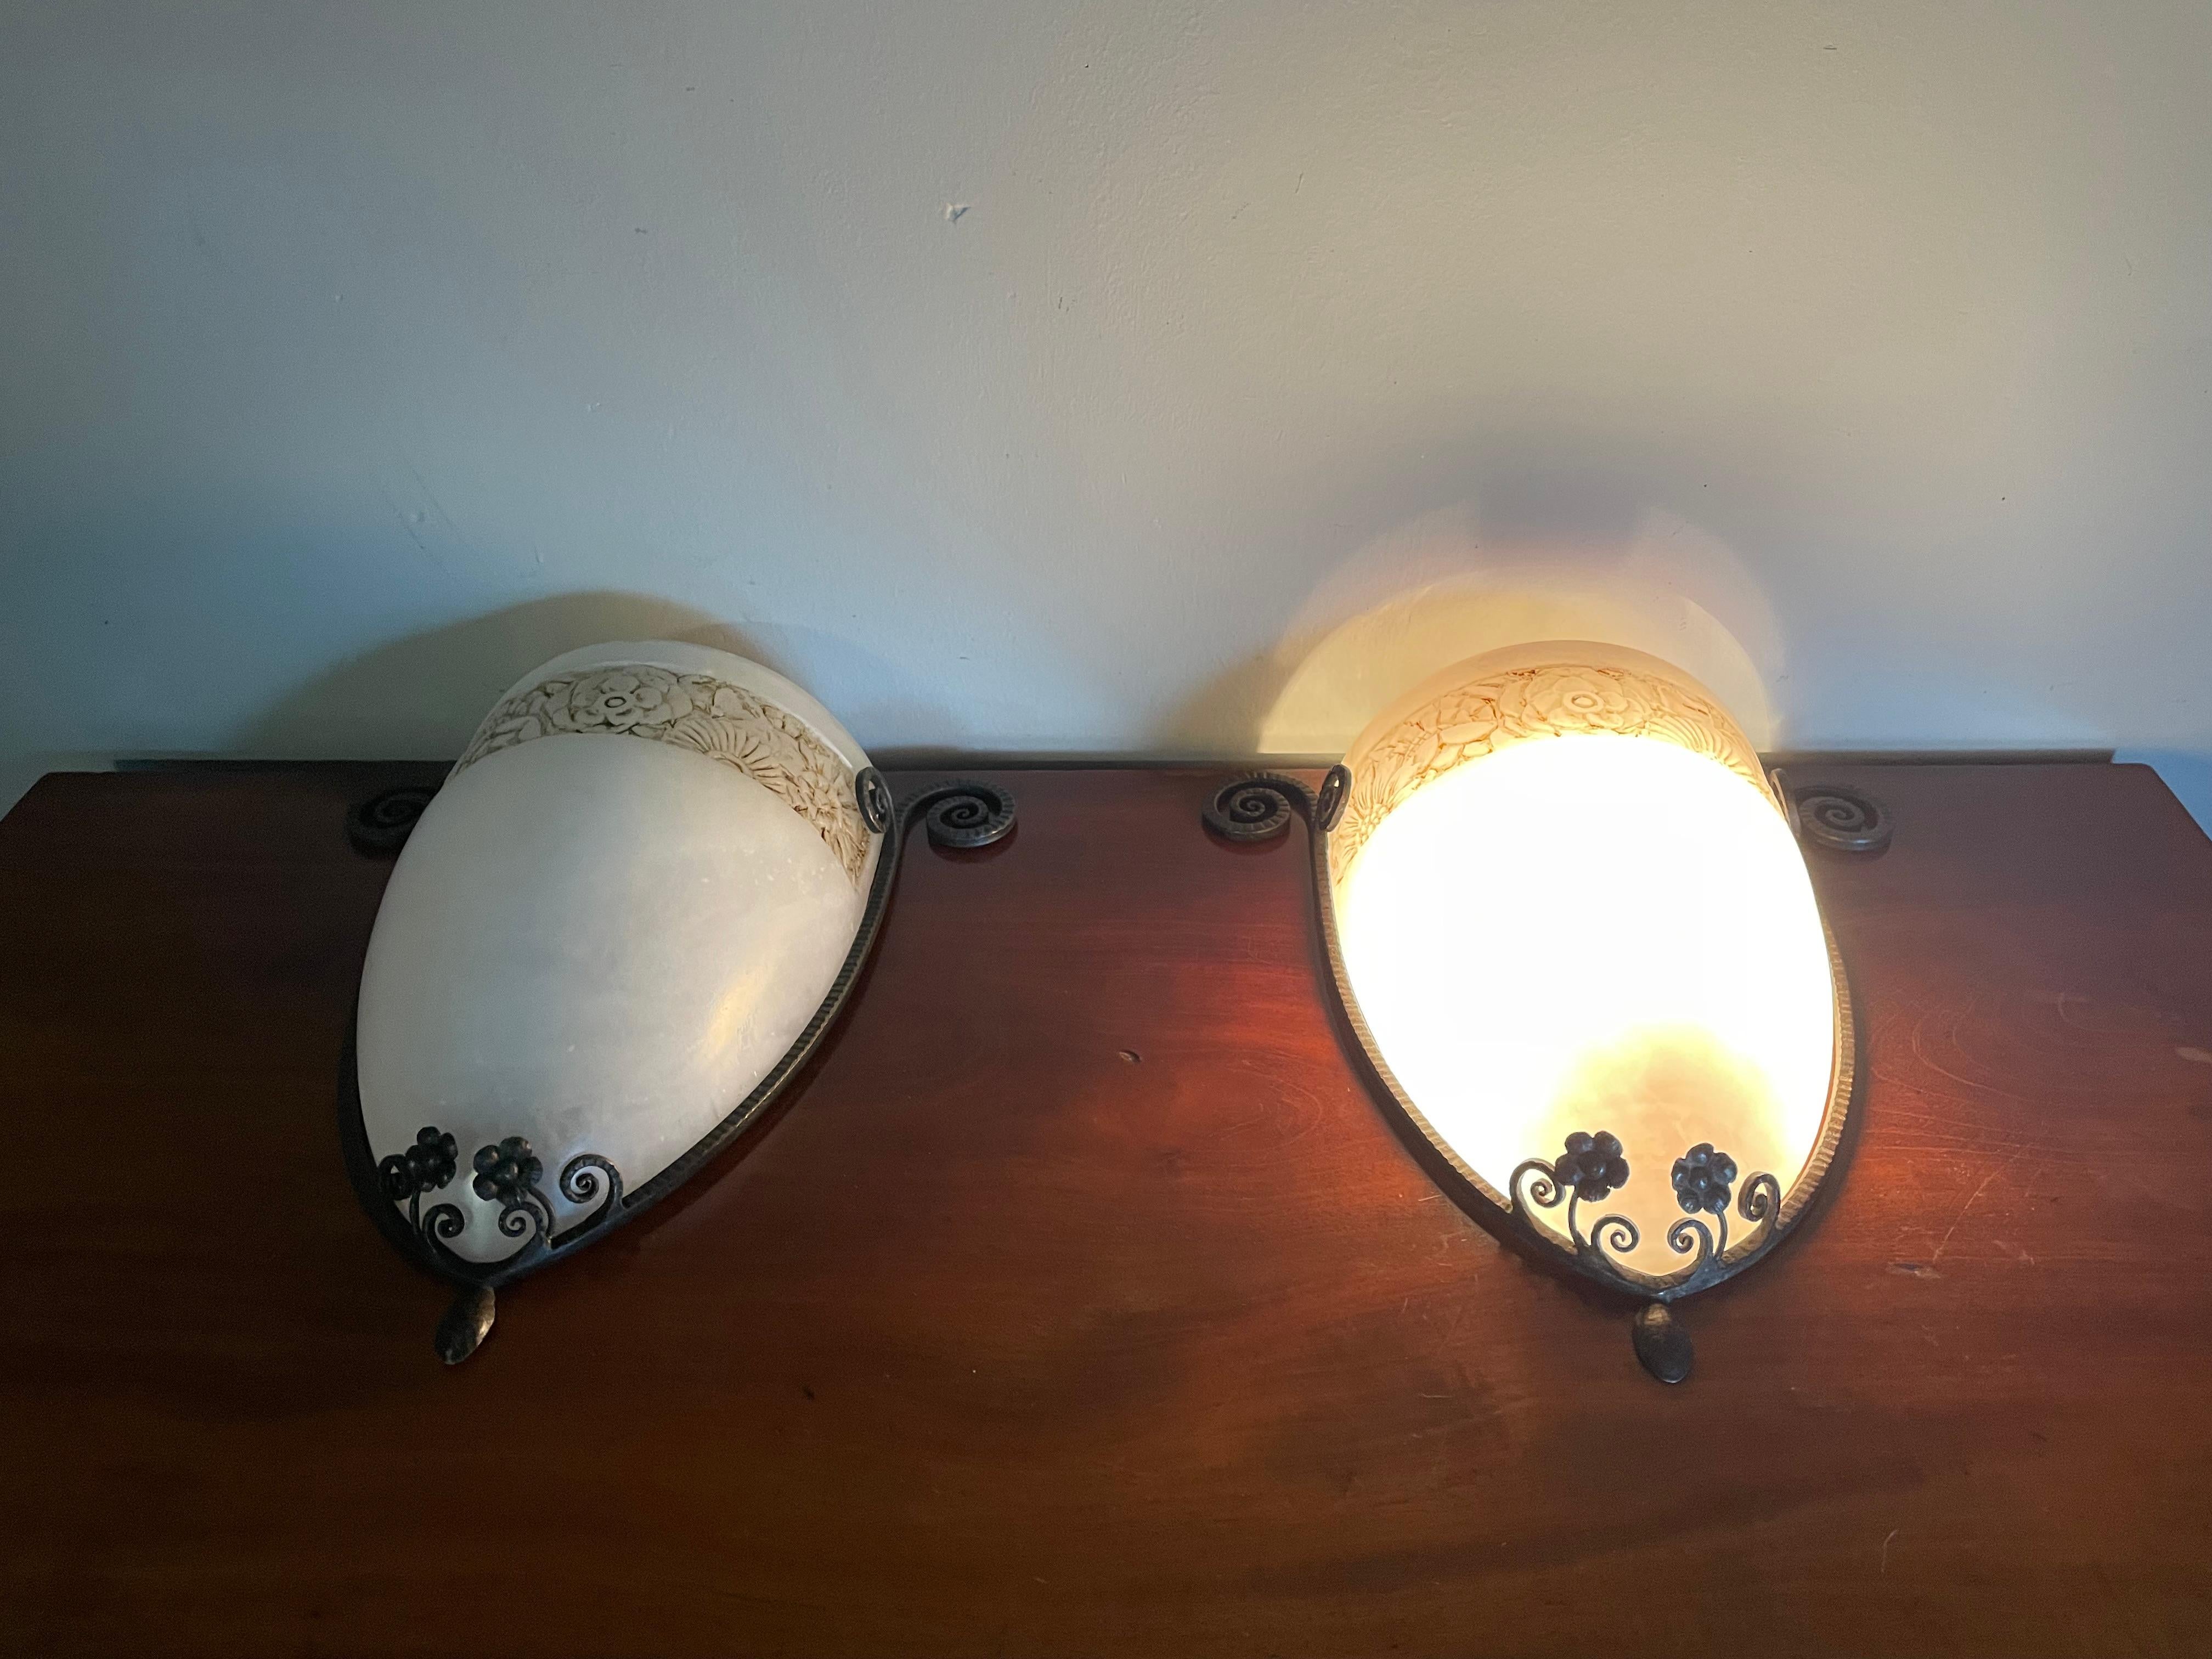 Rare Pair of Elegant Art Deco Wall Sconces Hand Forged Wrought Iron & Alabaster In Good Condition For Sale In Lisse, NL